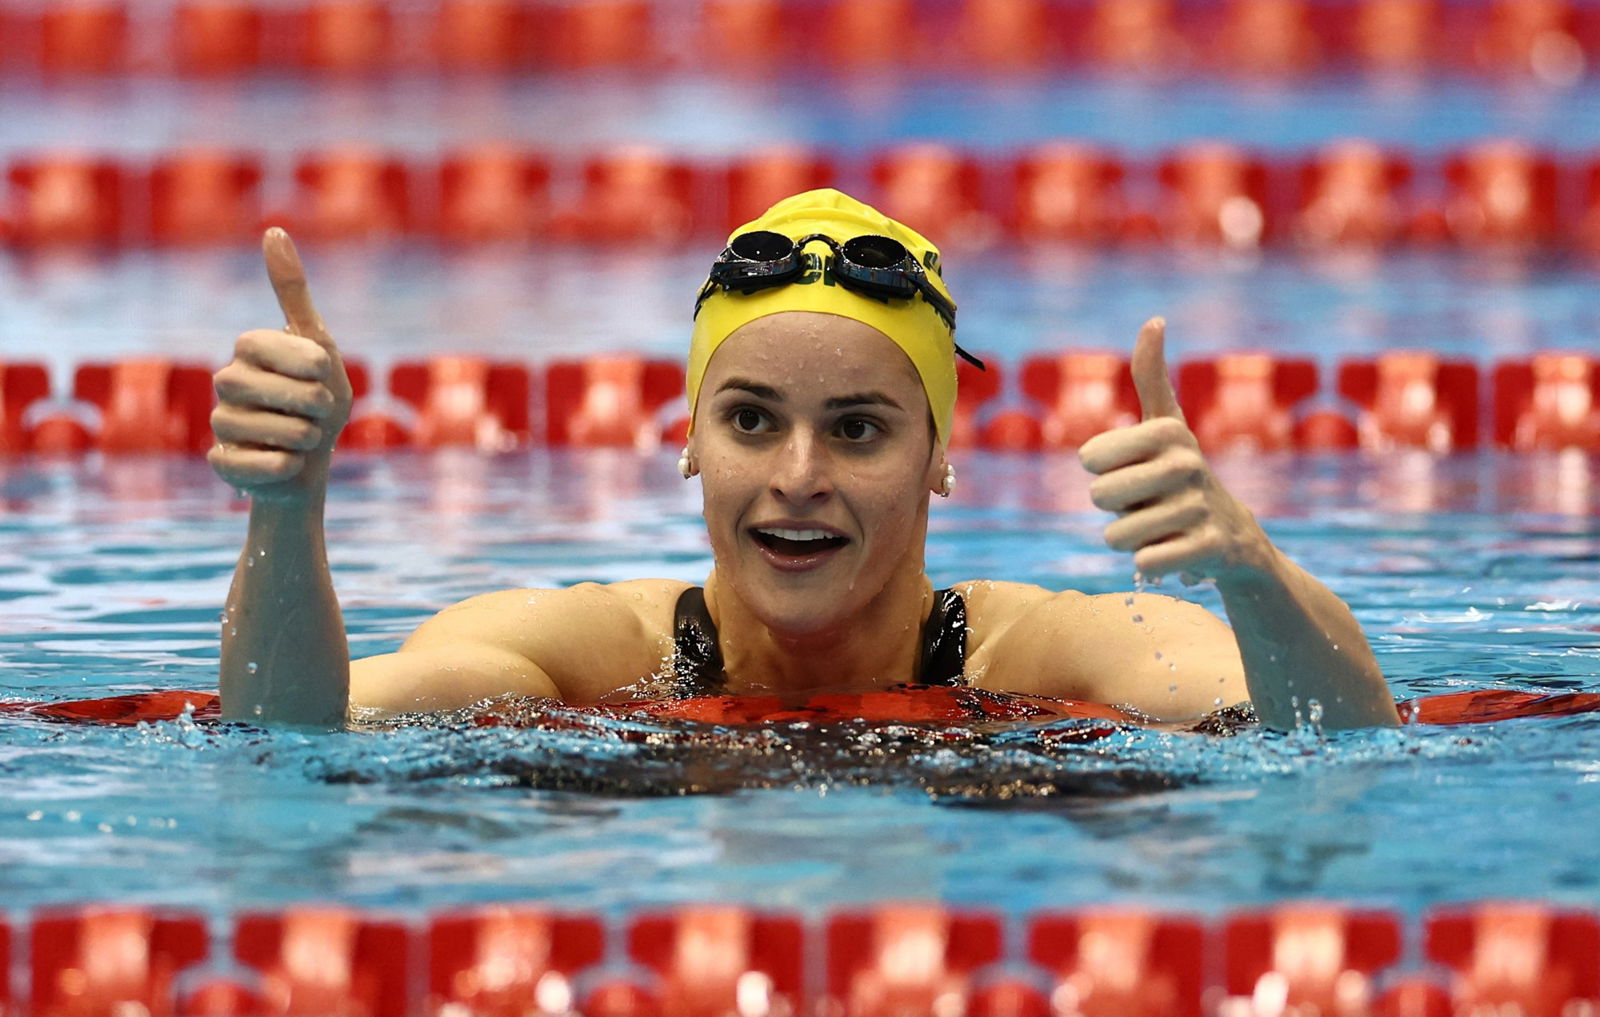 Kaylee McKeown gives two thumbs up in the pool